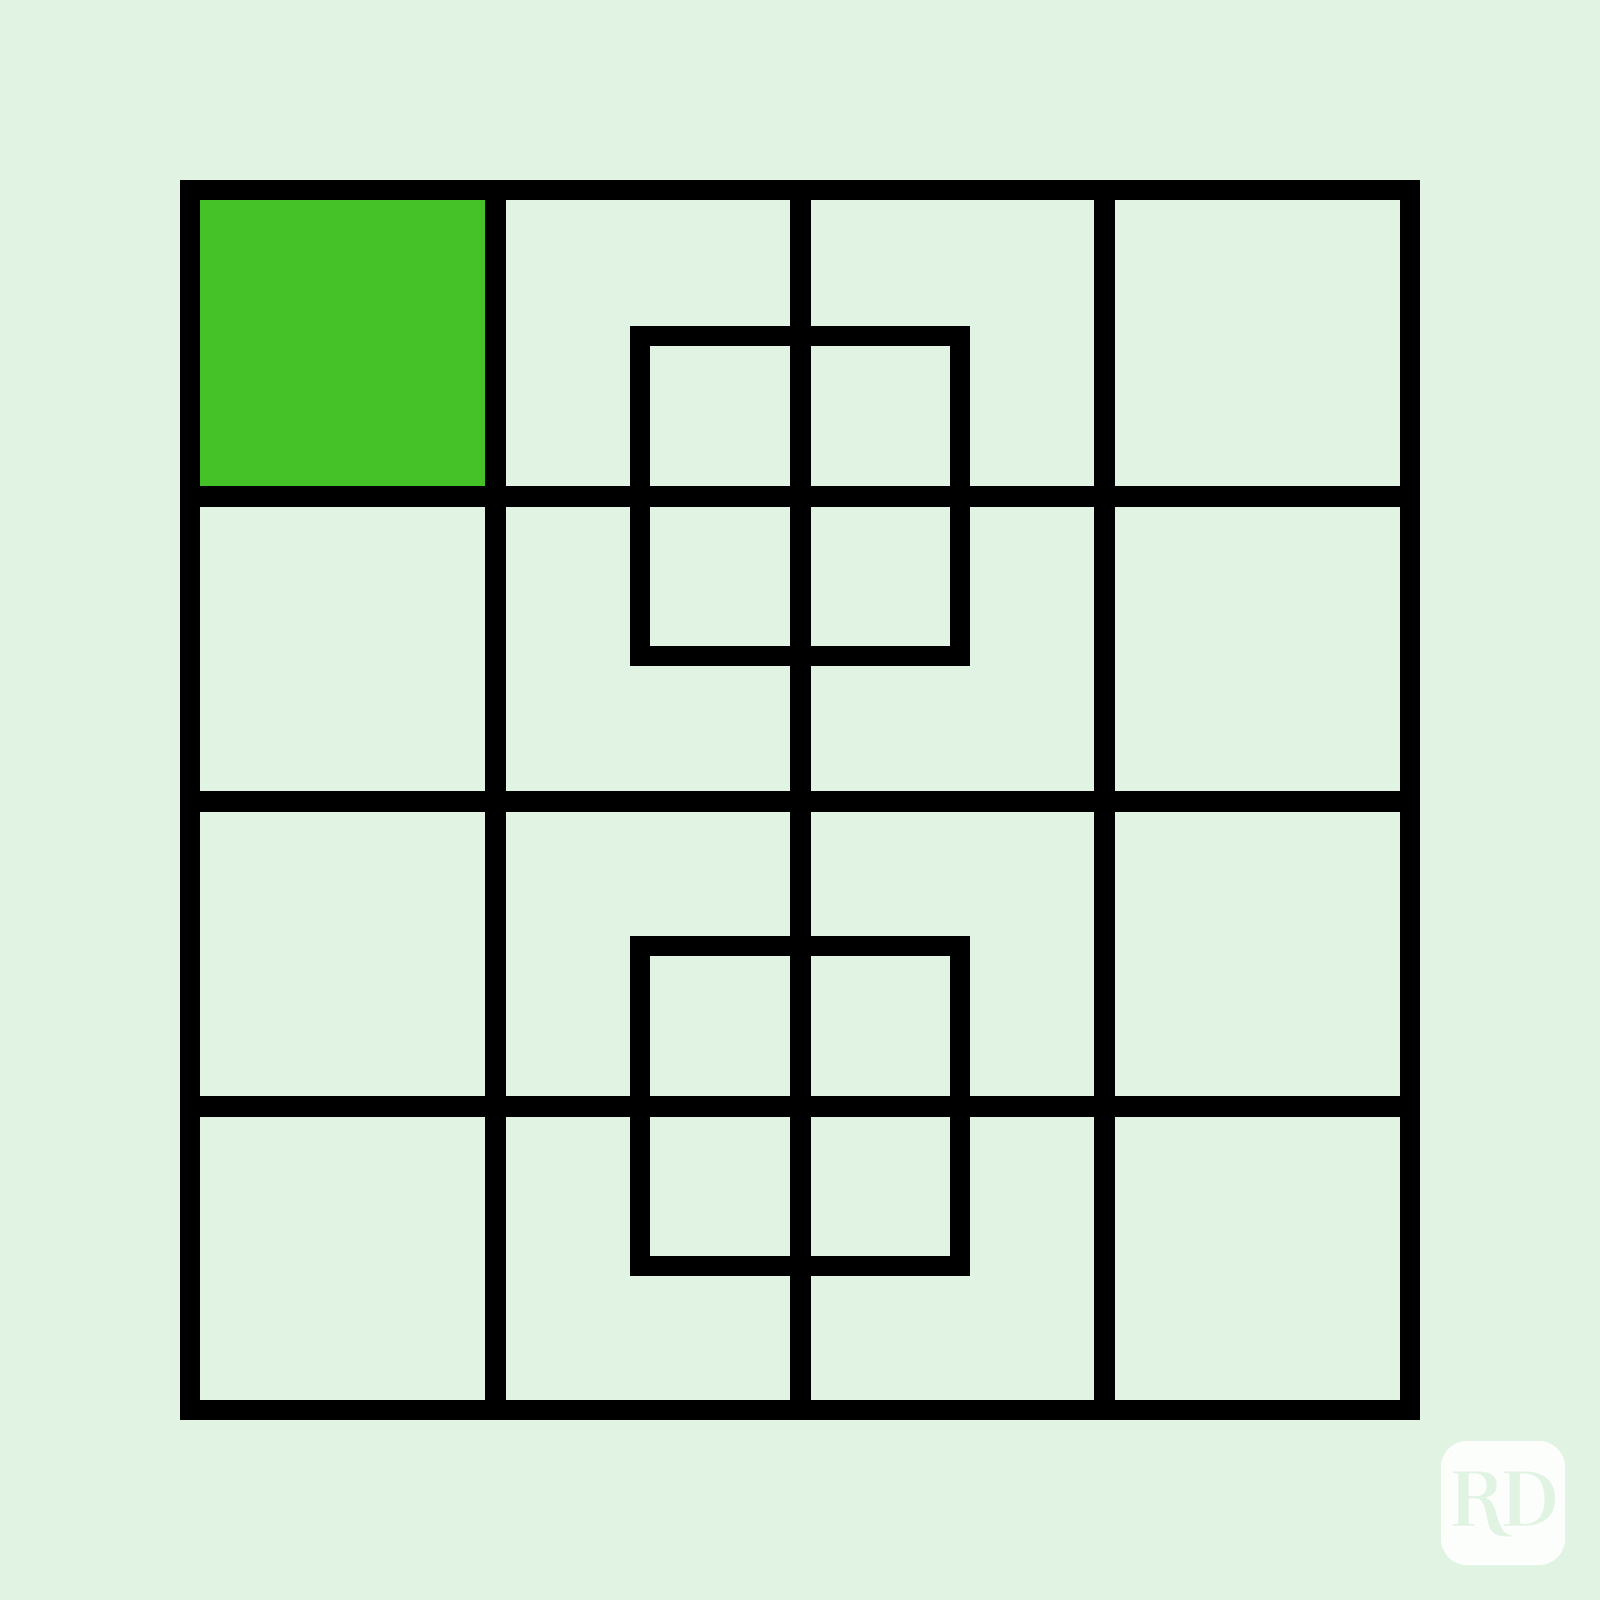 How Many Squares Do You See in This Puzzle?